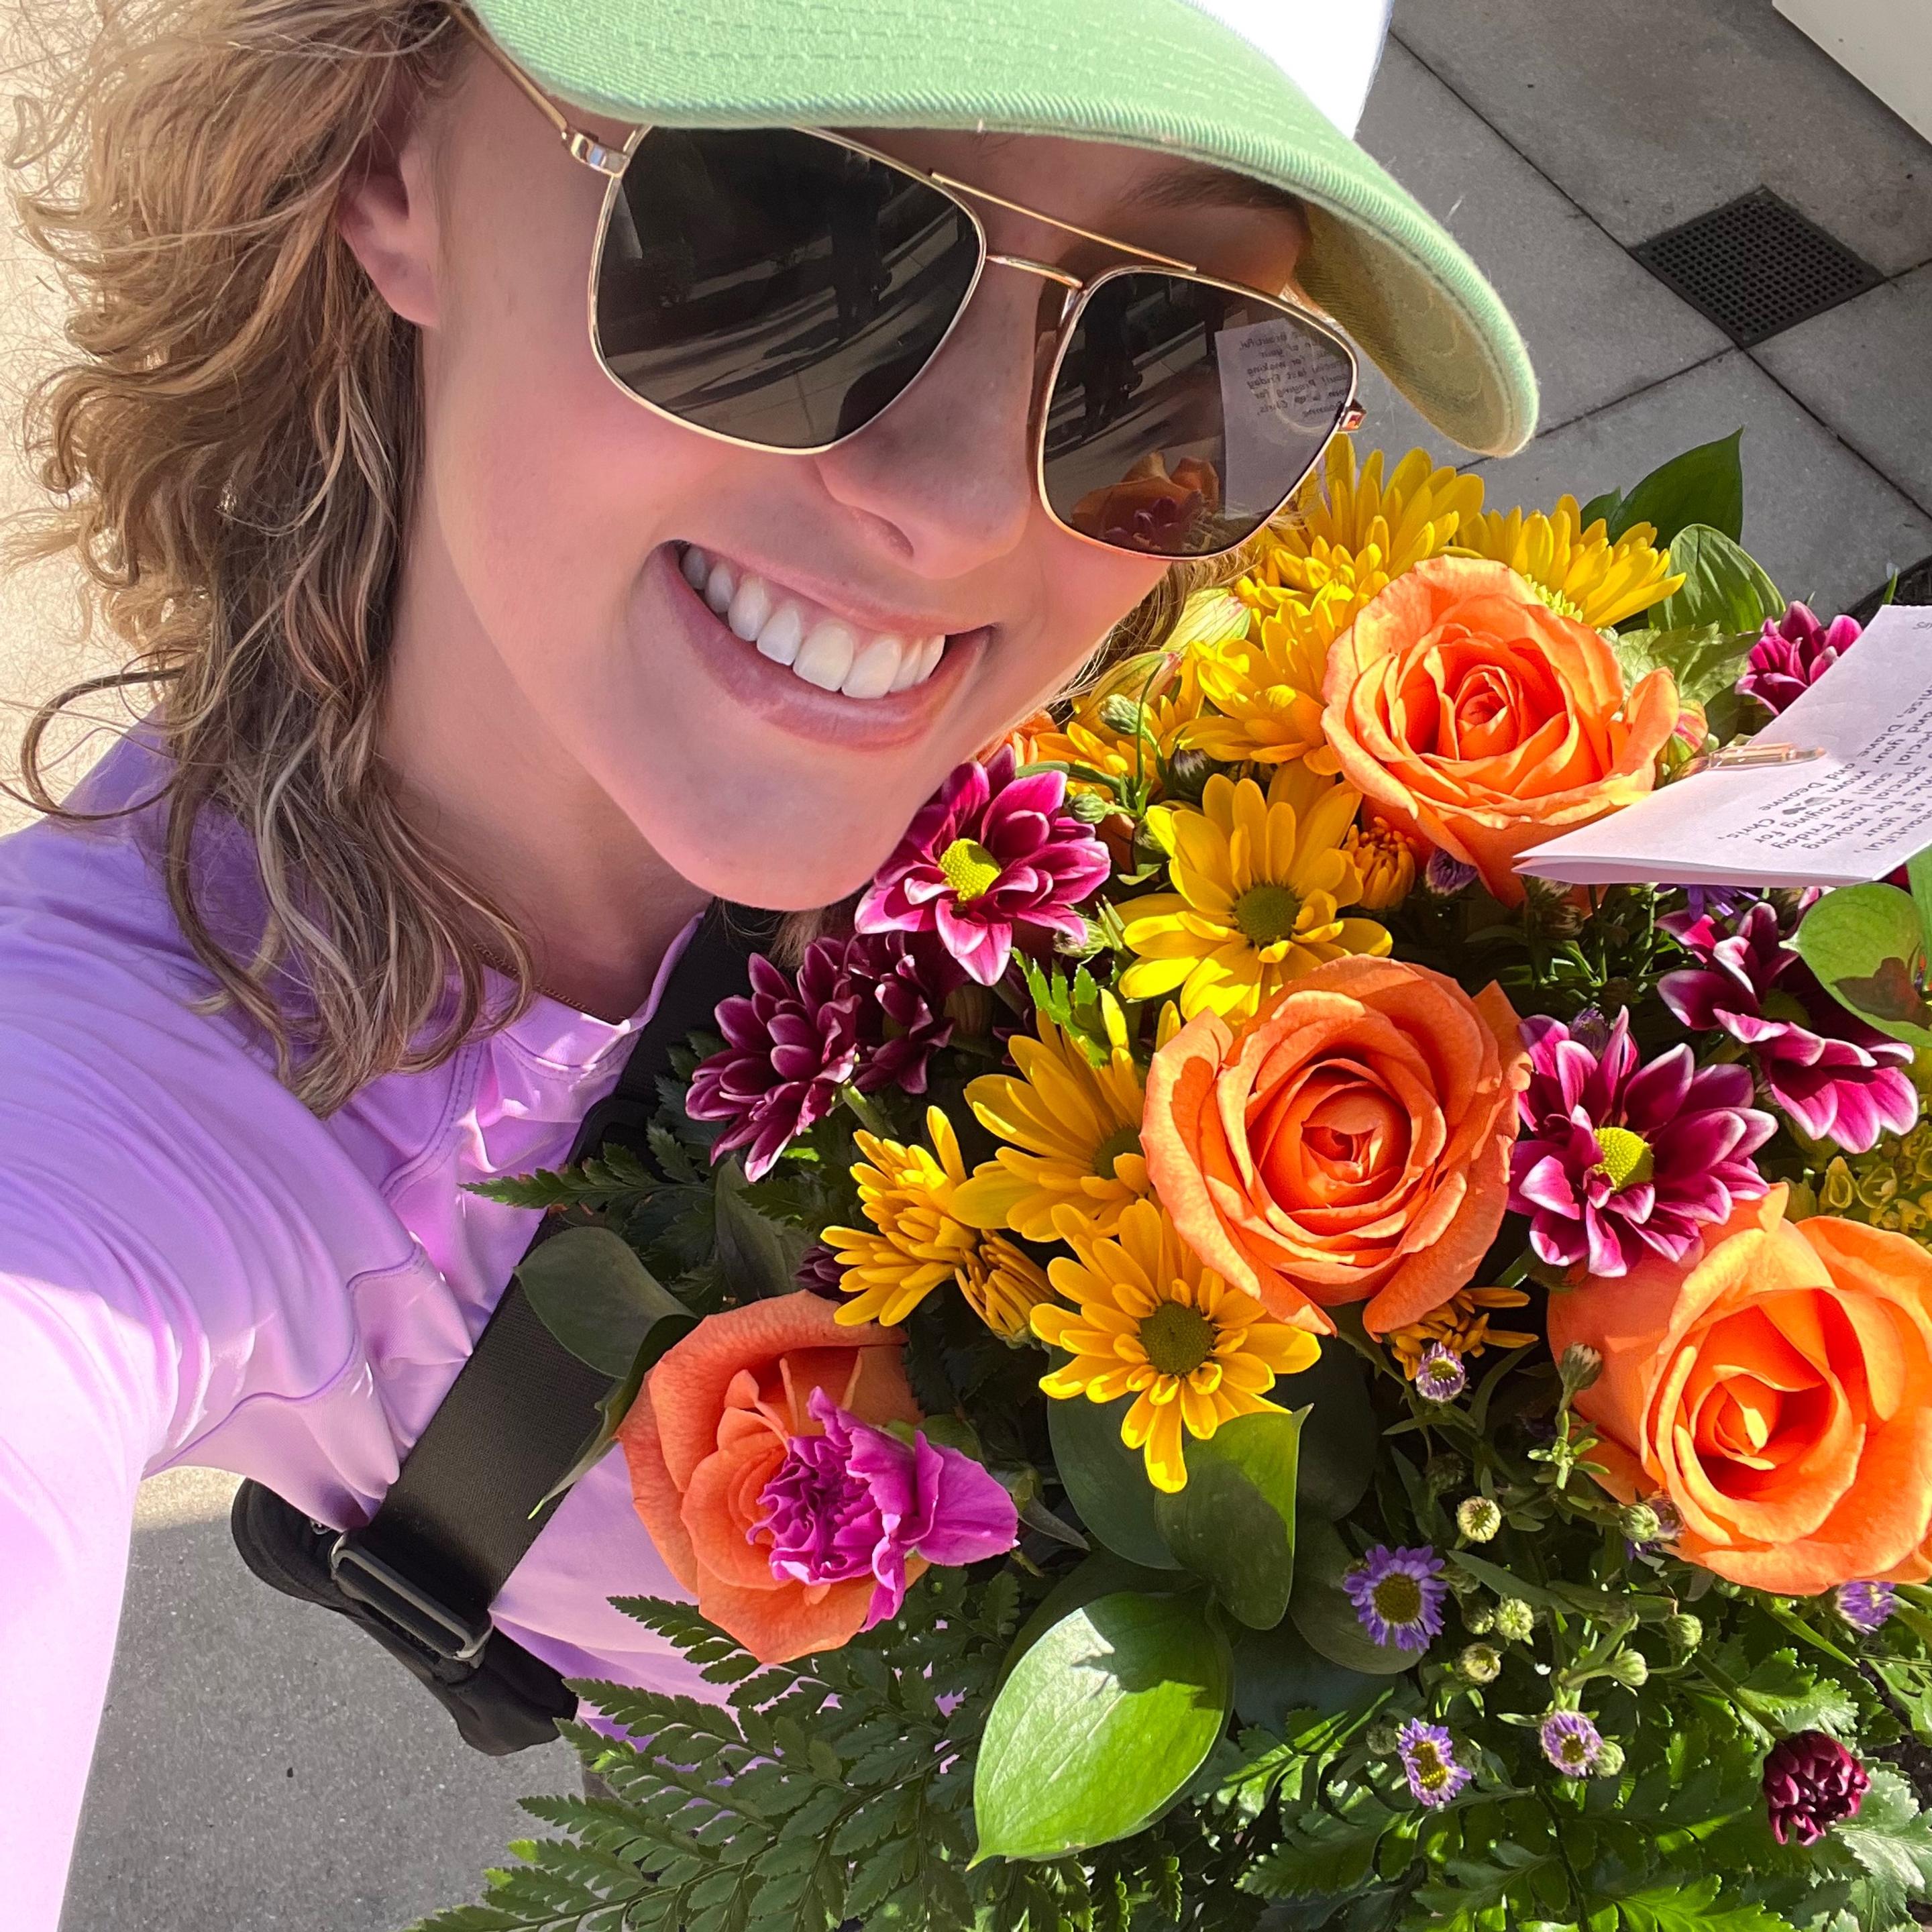 Woman in hat and sunglasses smiling, holding a bright orange flower arrangement